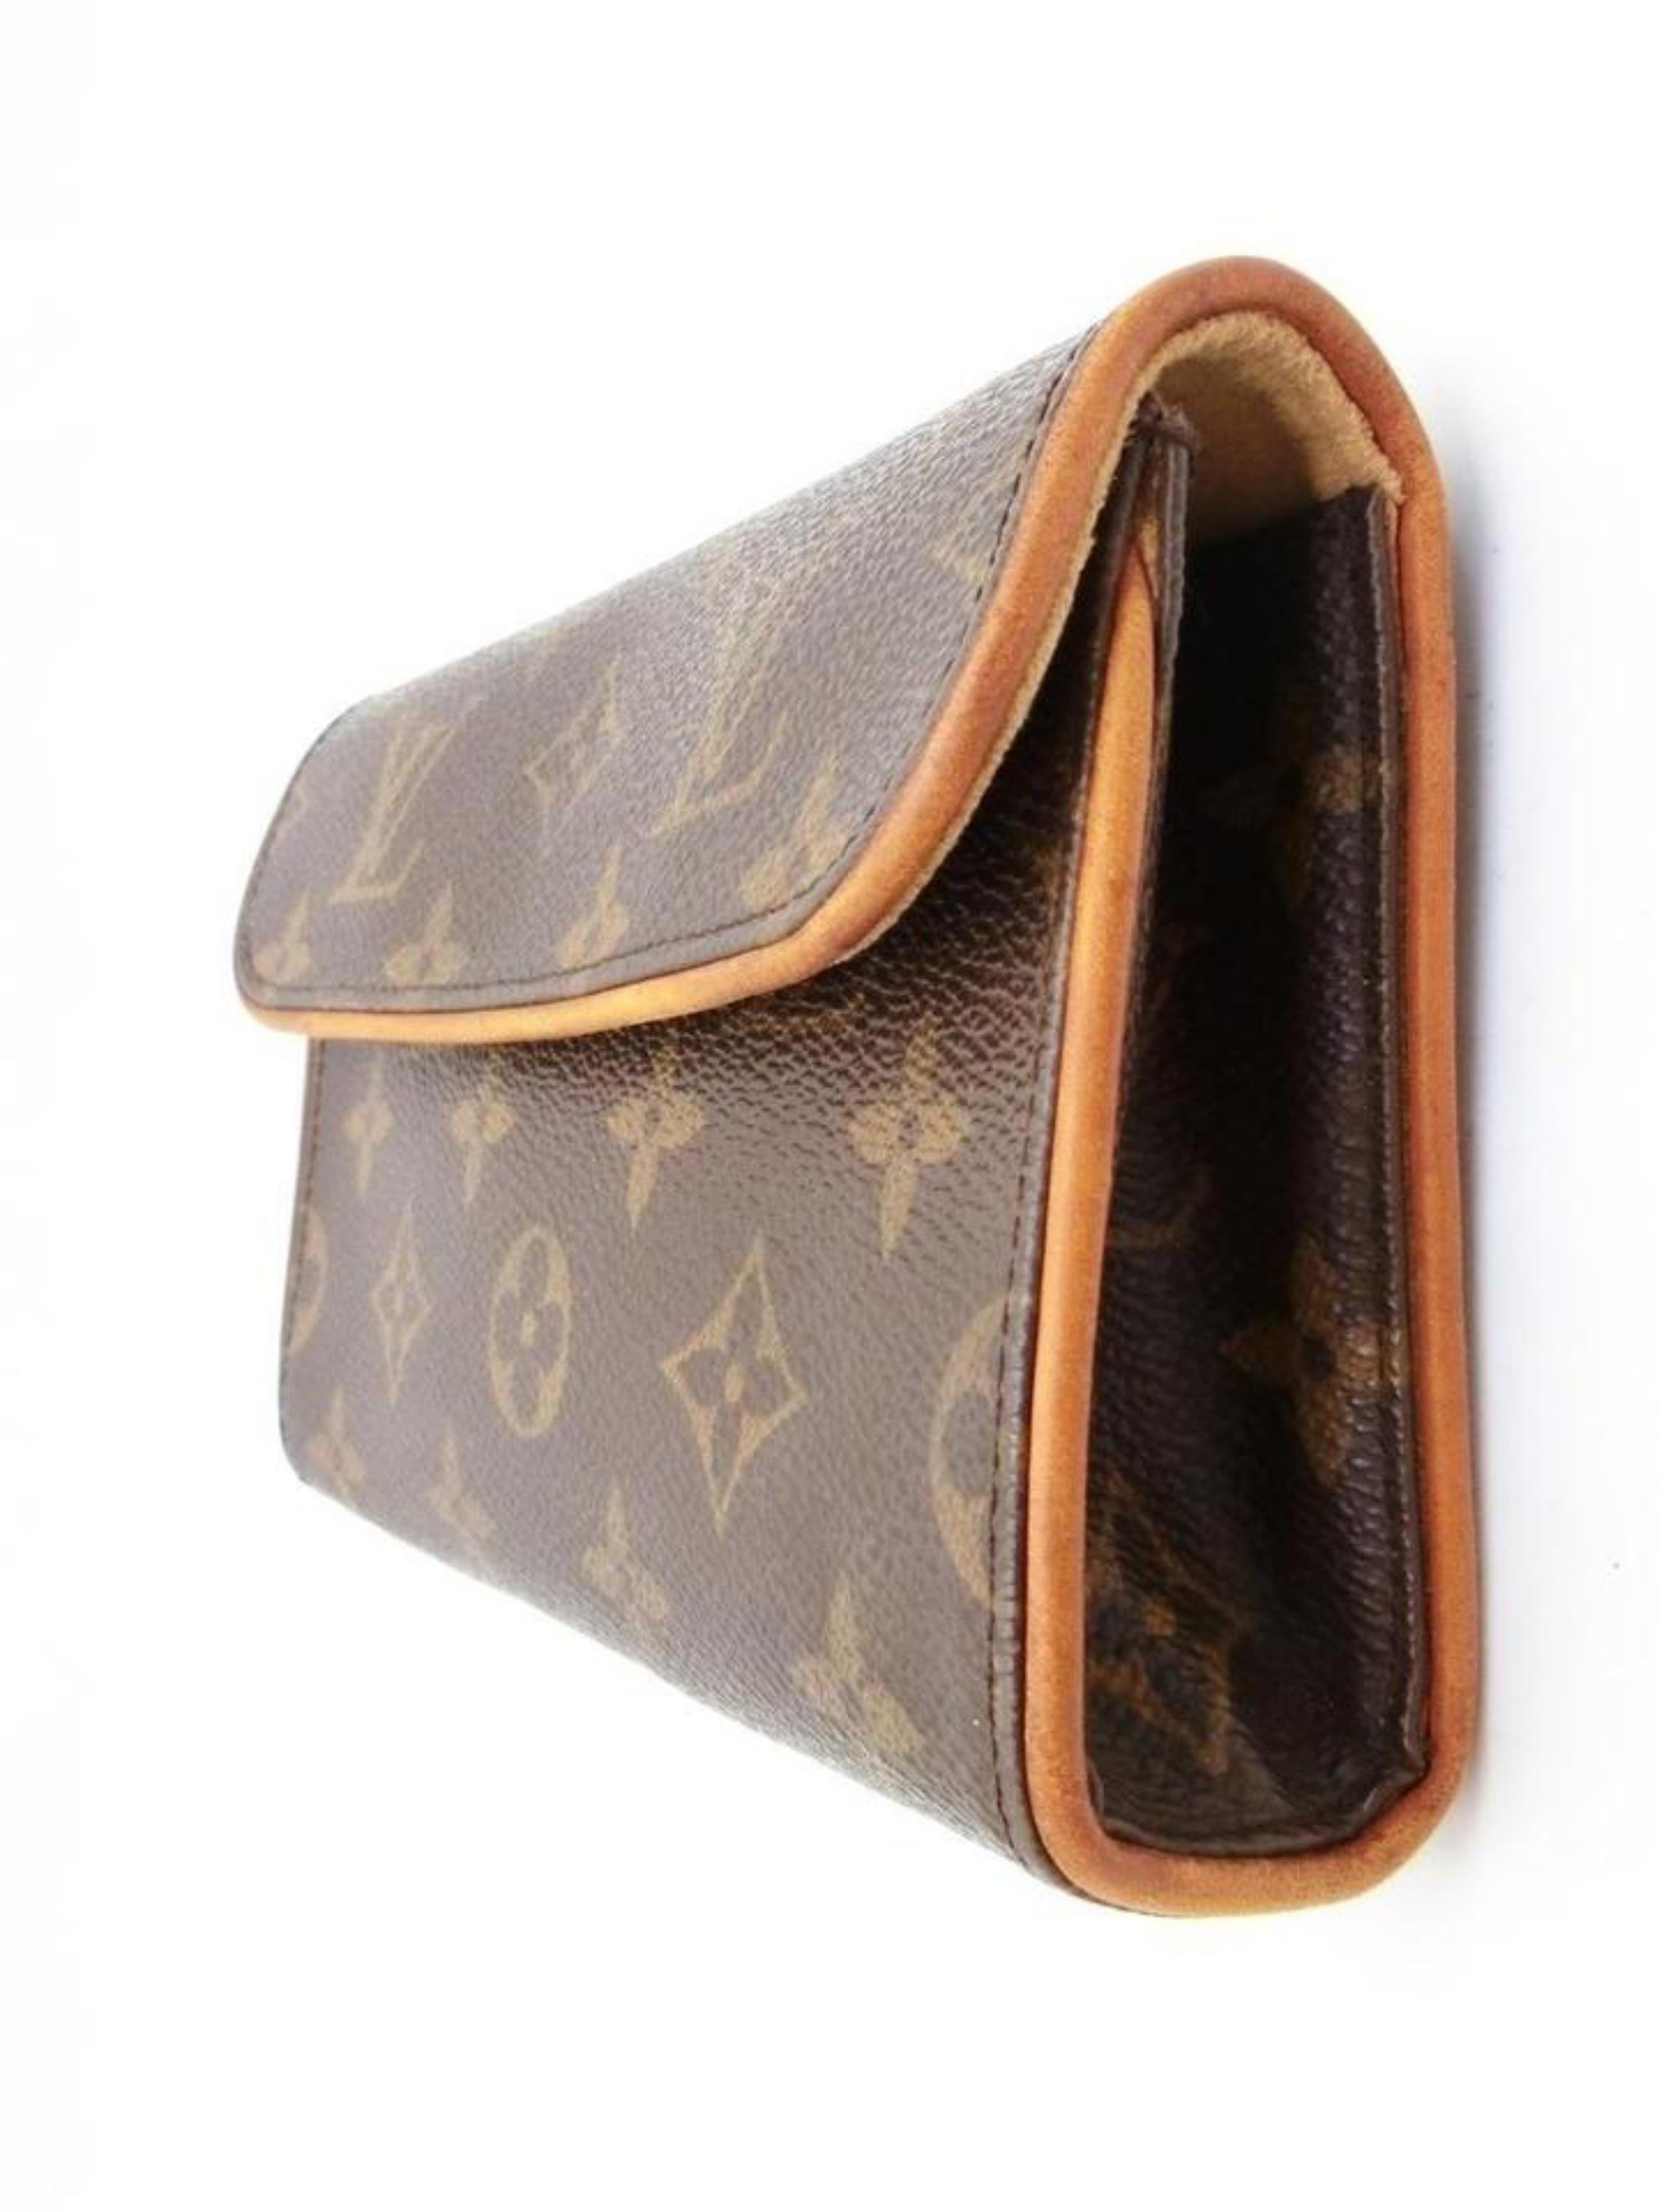 Louis Vuitton Florentine Pochette Monogram Bum Fanny Pack 230612 Brown Clutch In Good Condition For Sale In Forest Hills, NY